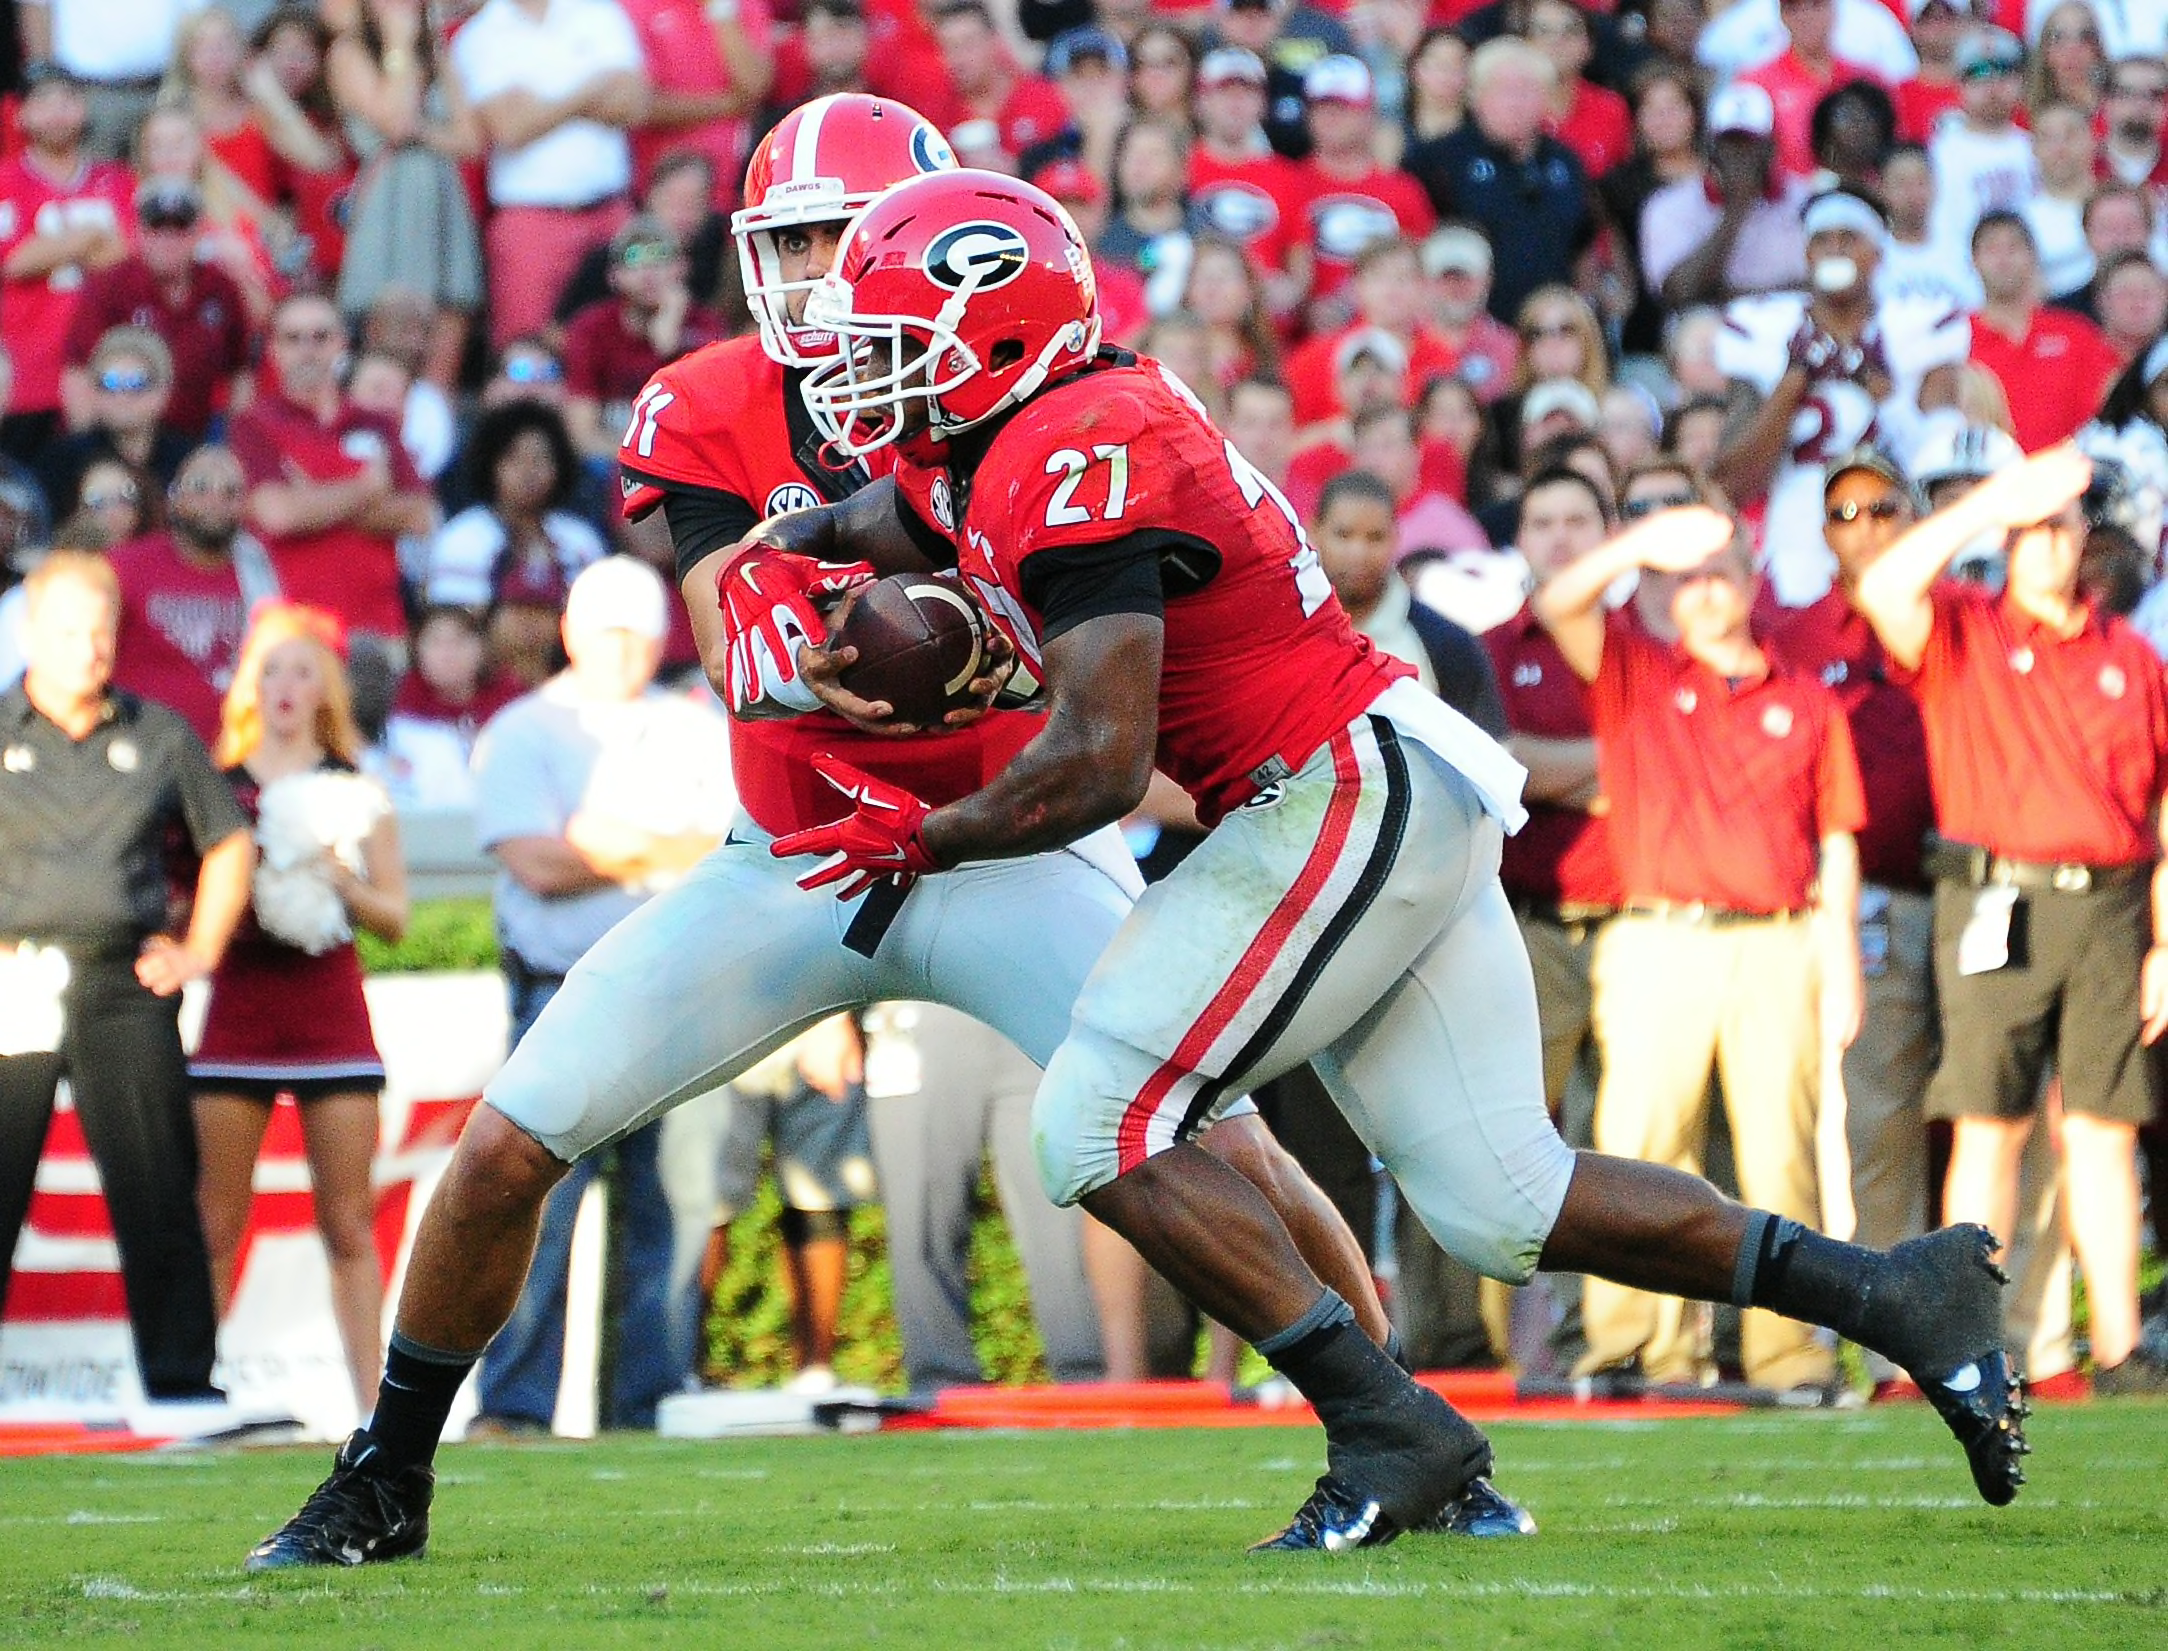 Georgia thrilled to still have Nick Chubb and Sony Michel, but senior  tailbacks are rarely special